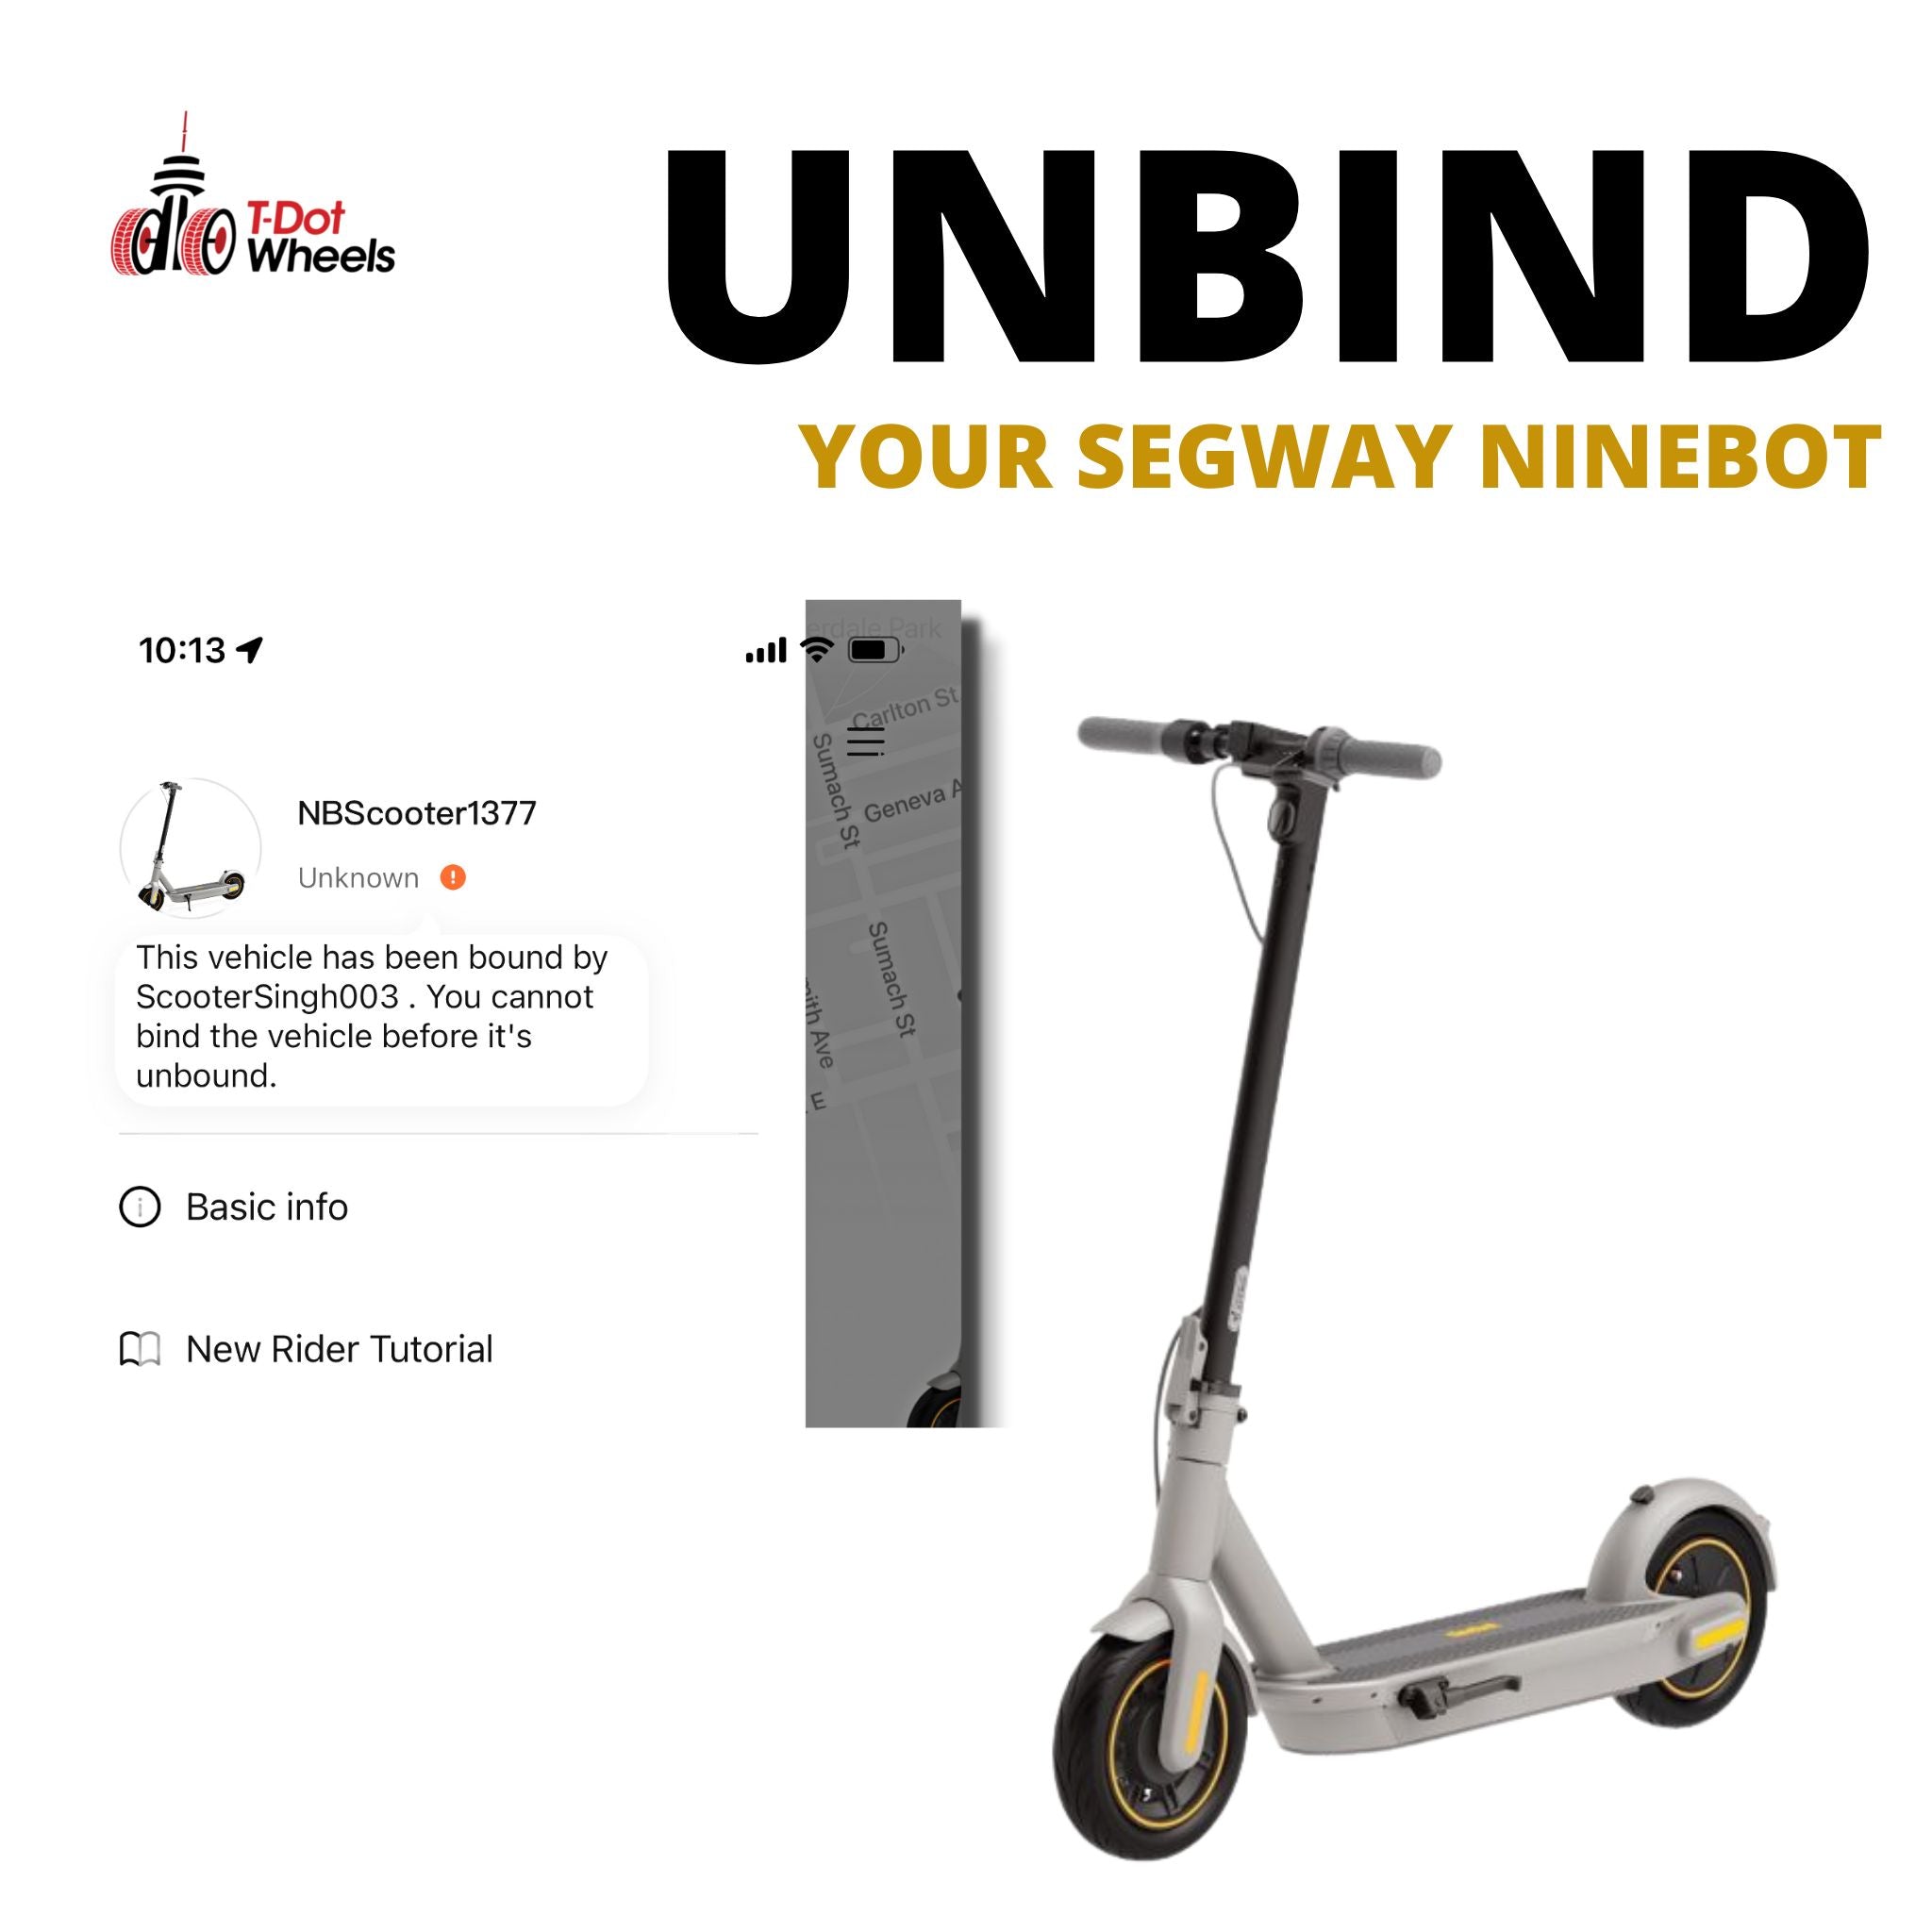 Unbind your segway ninebot scooter. Remove the previous owner of your segway ninebot electric scooter